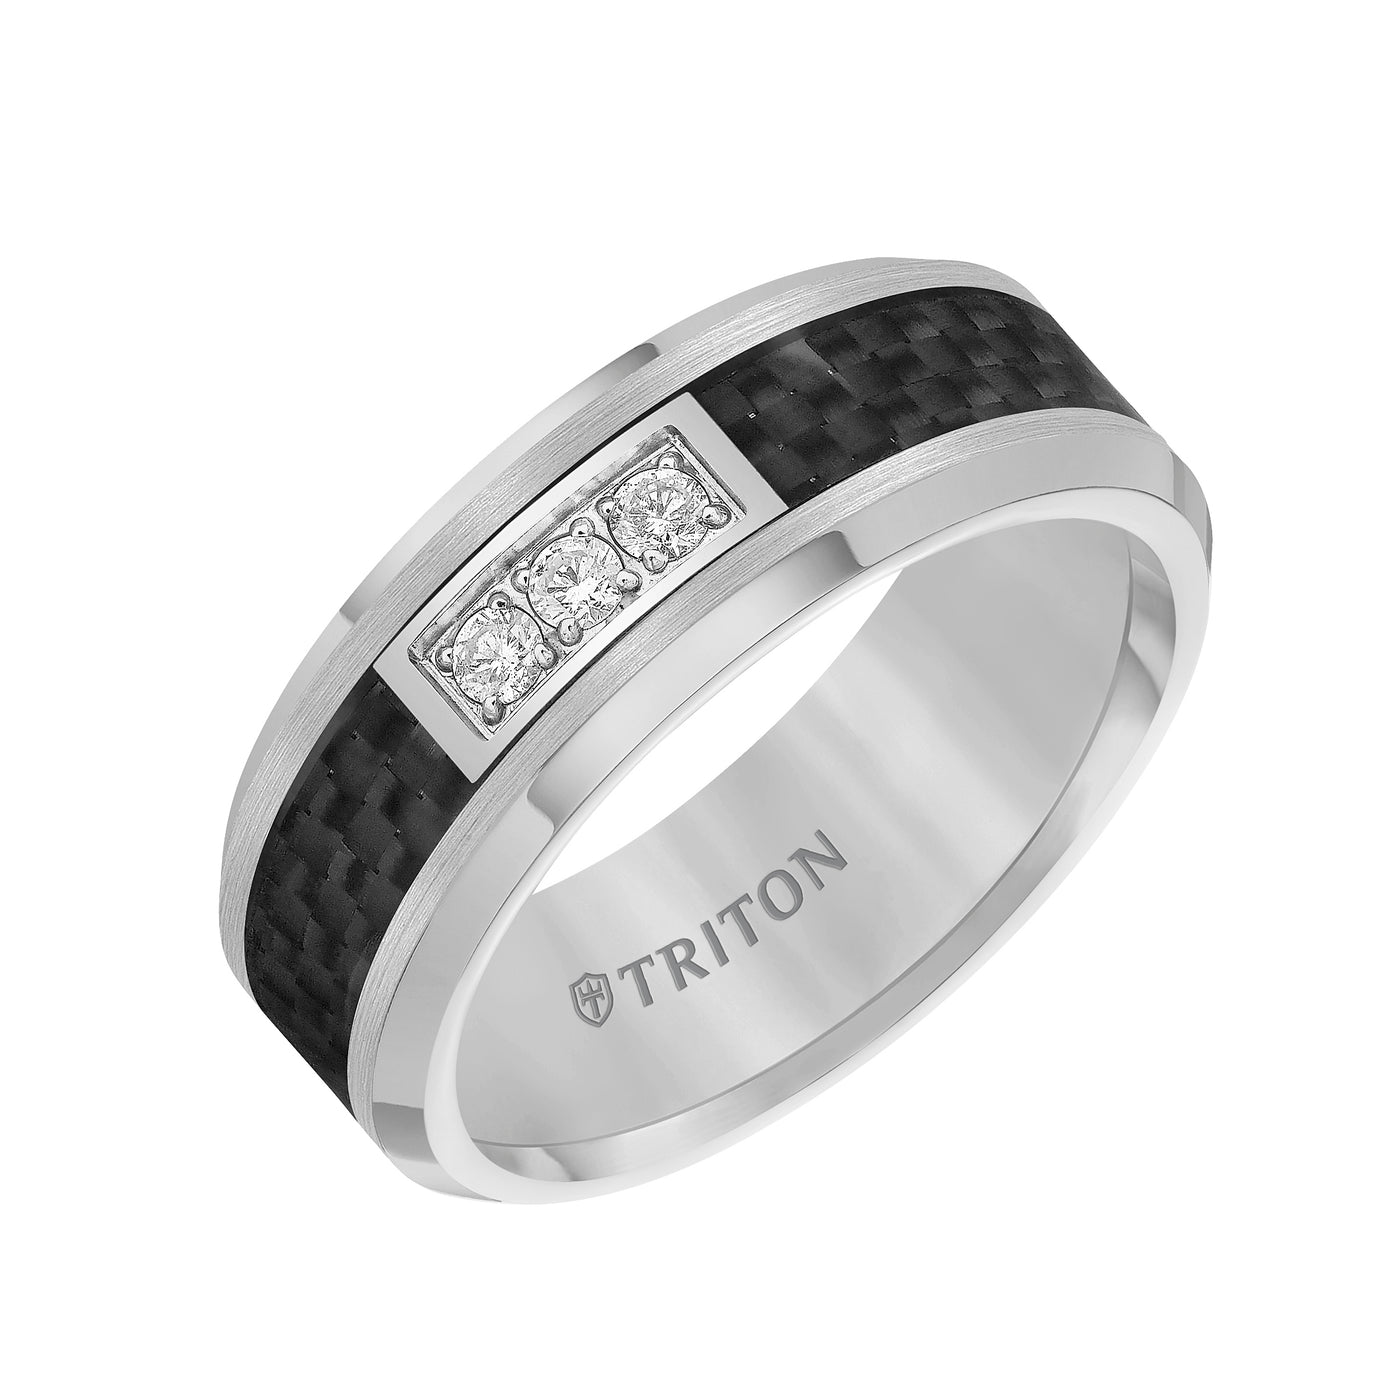 8mm Tungsten carbide Bevel Edge Comfort Fit diamond band with black carbon fiber inlay